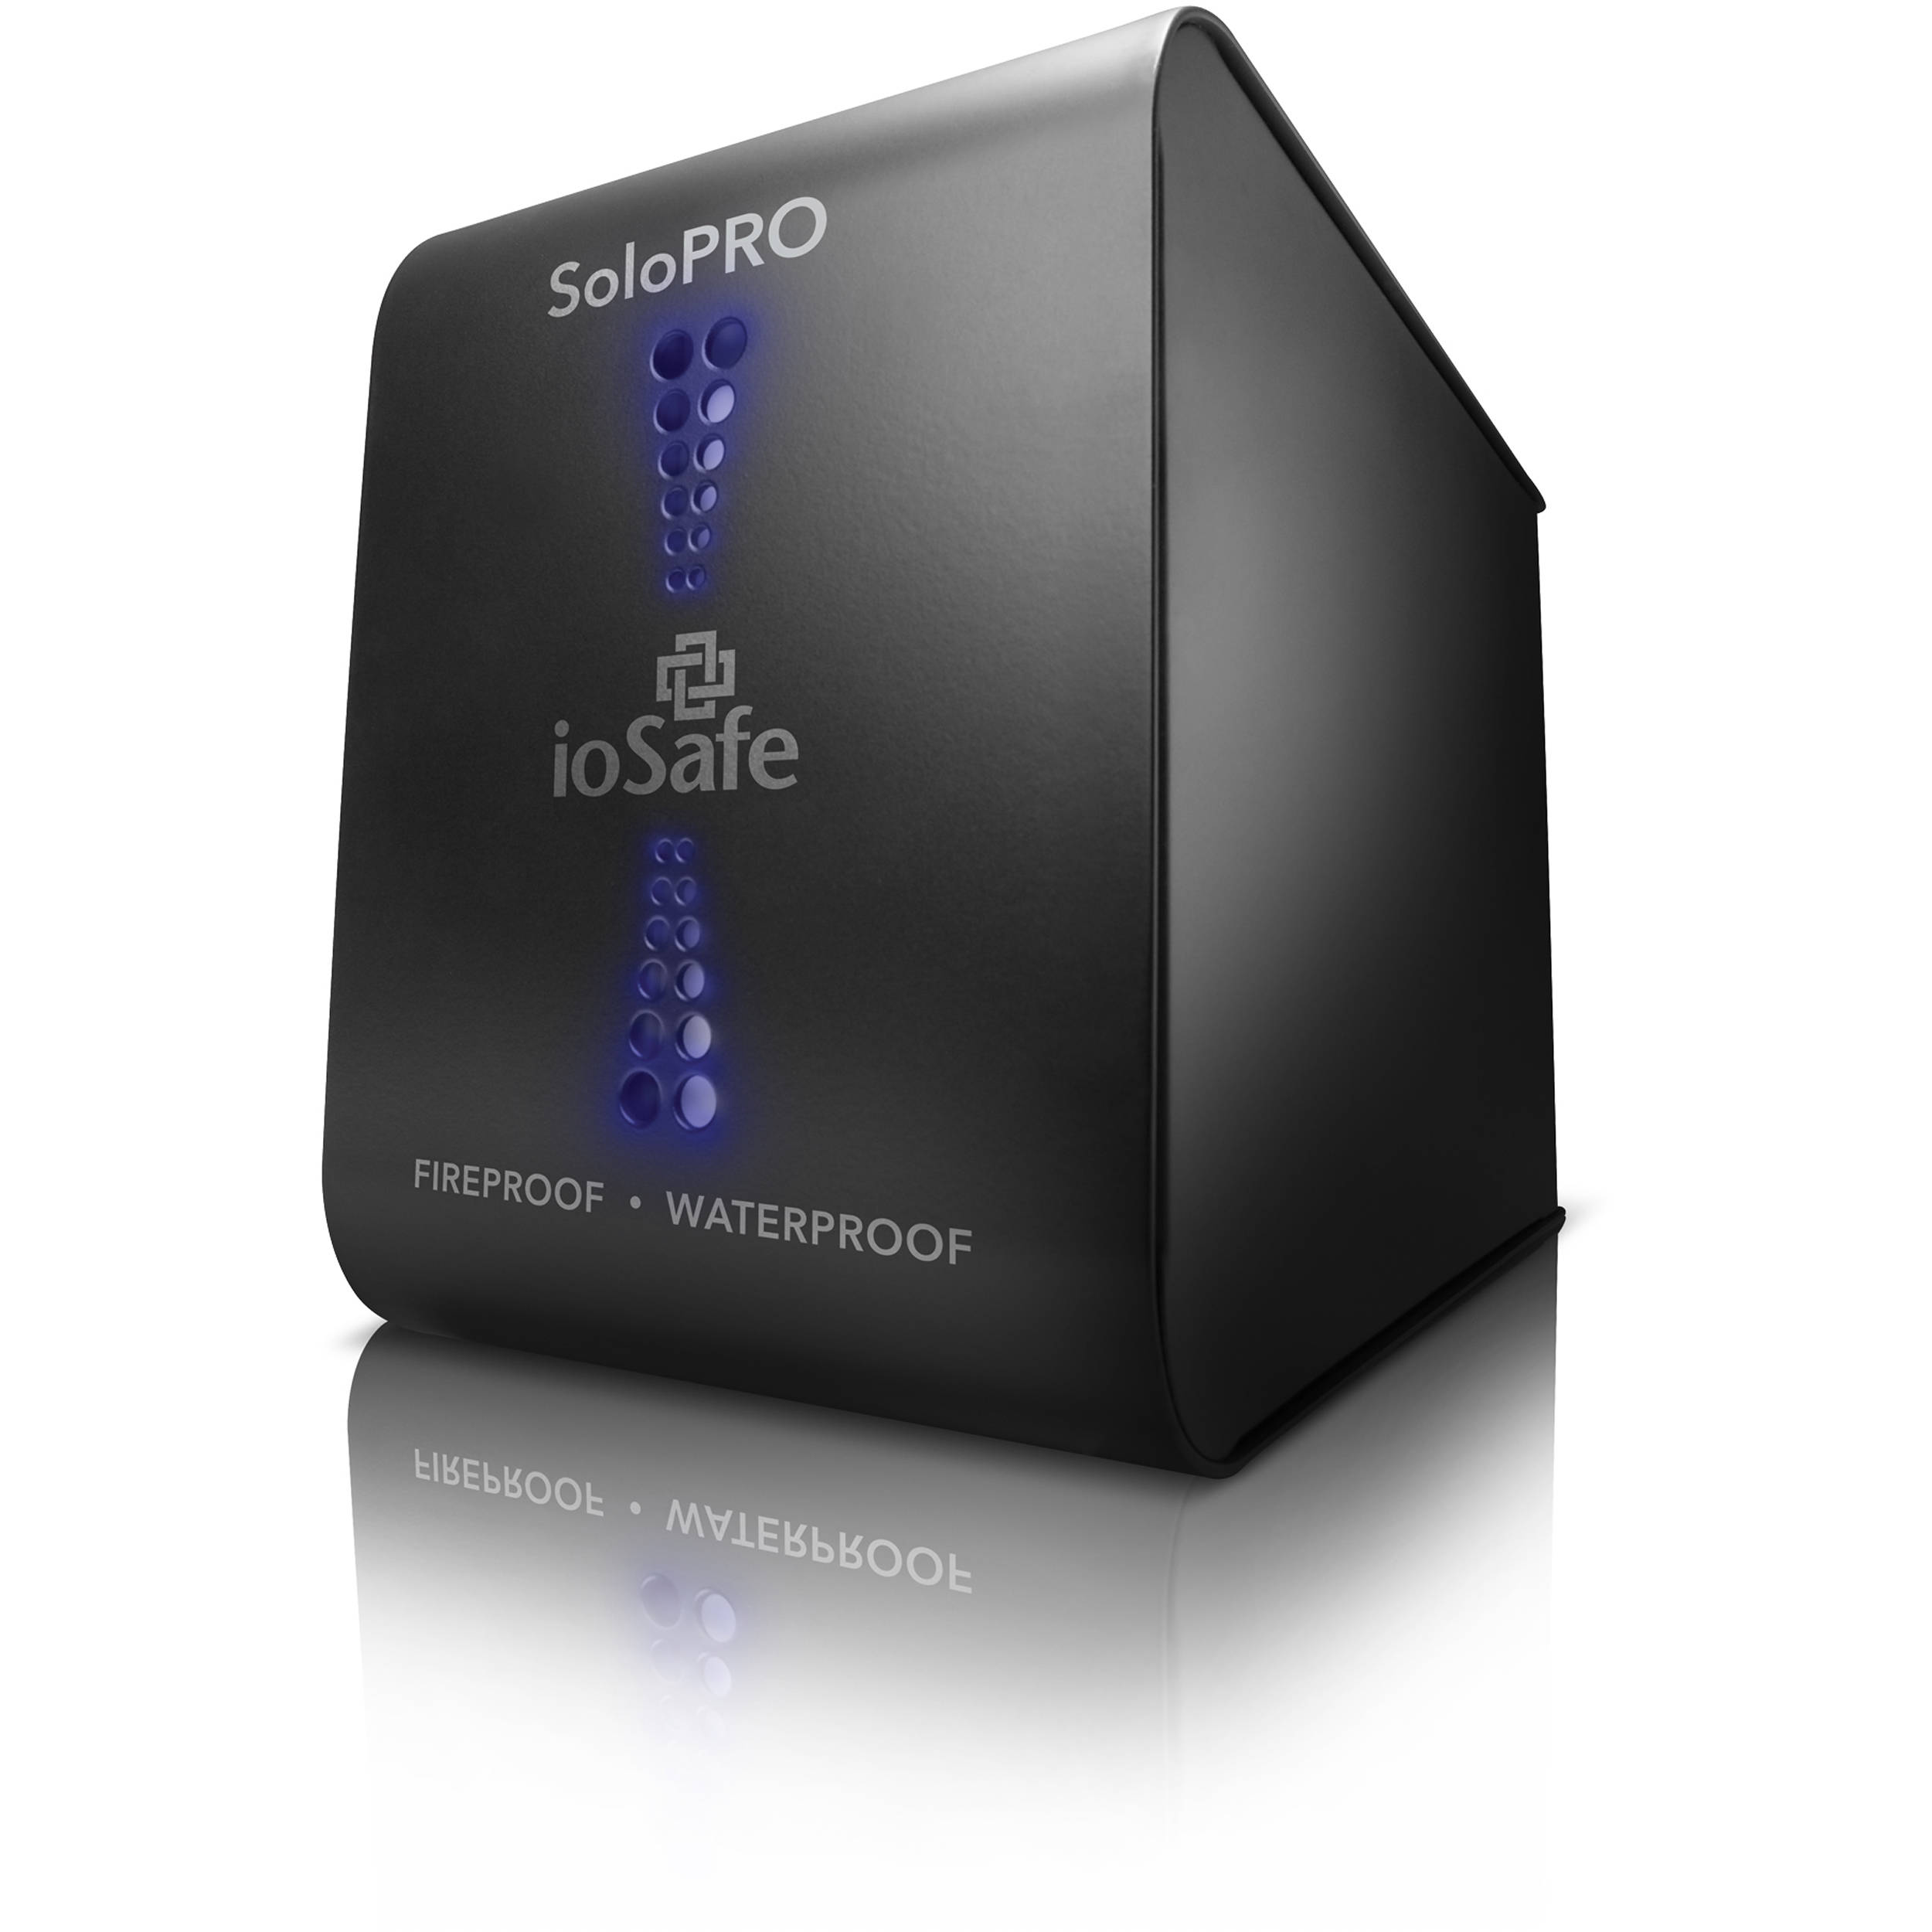 IoSafe SoloPRO Fire and Waterproof USB 3.0 External Hard Drive (4TB, 5-Year DRS)